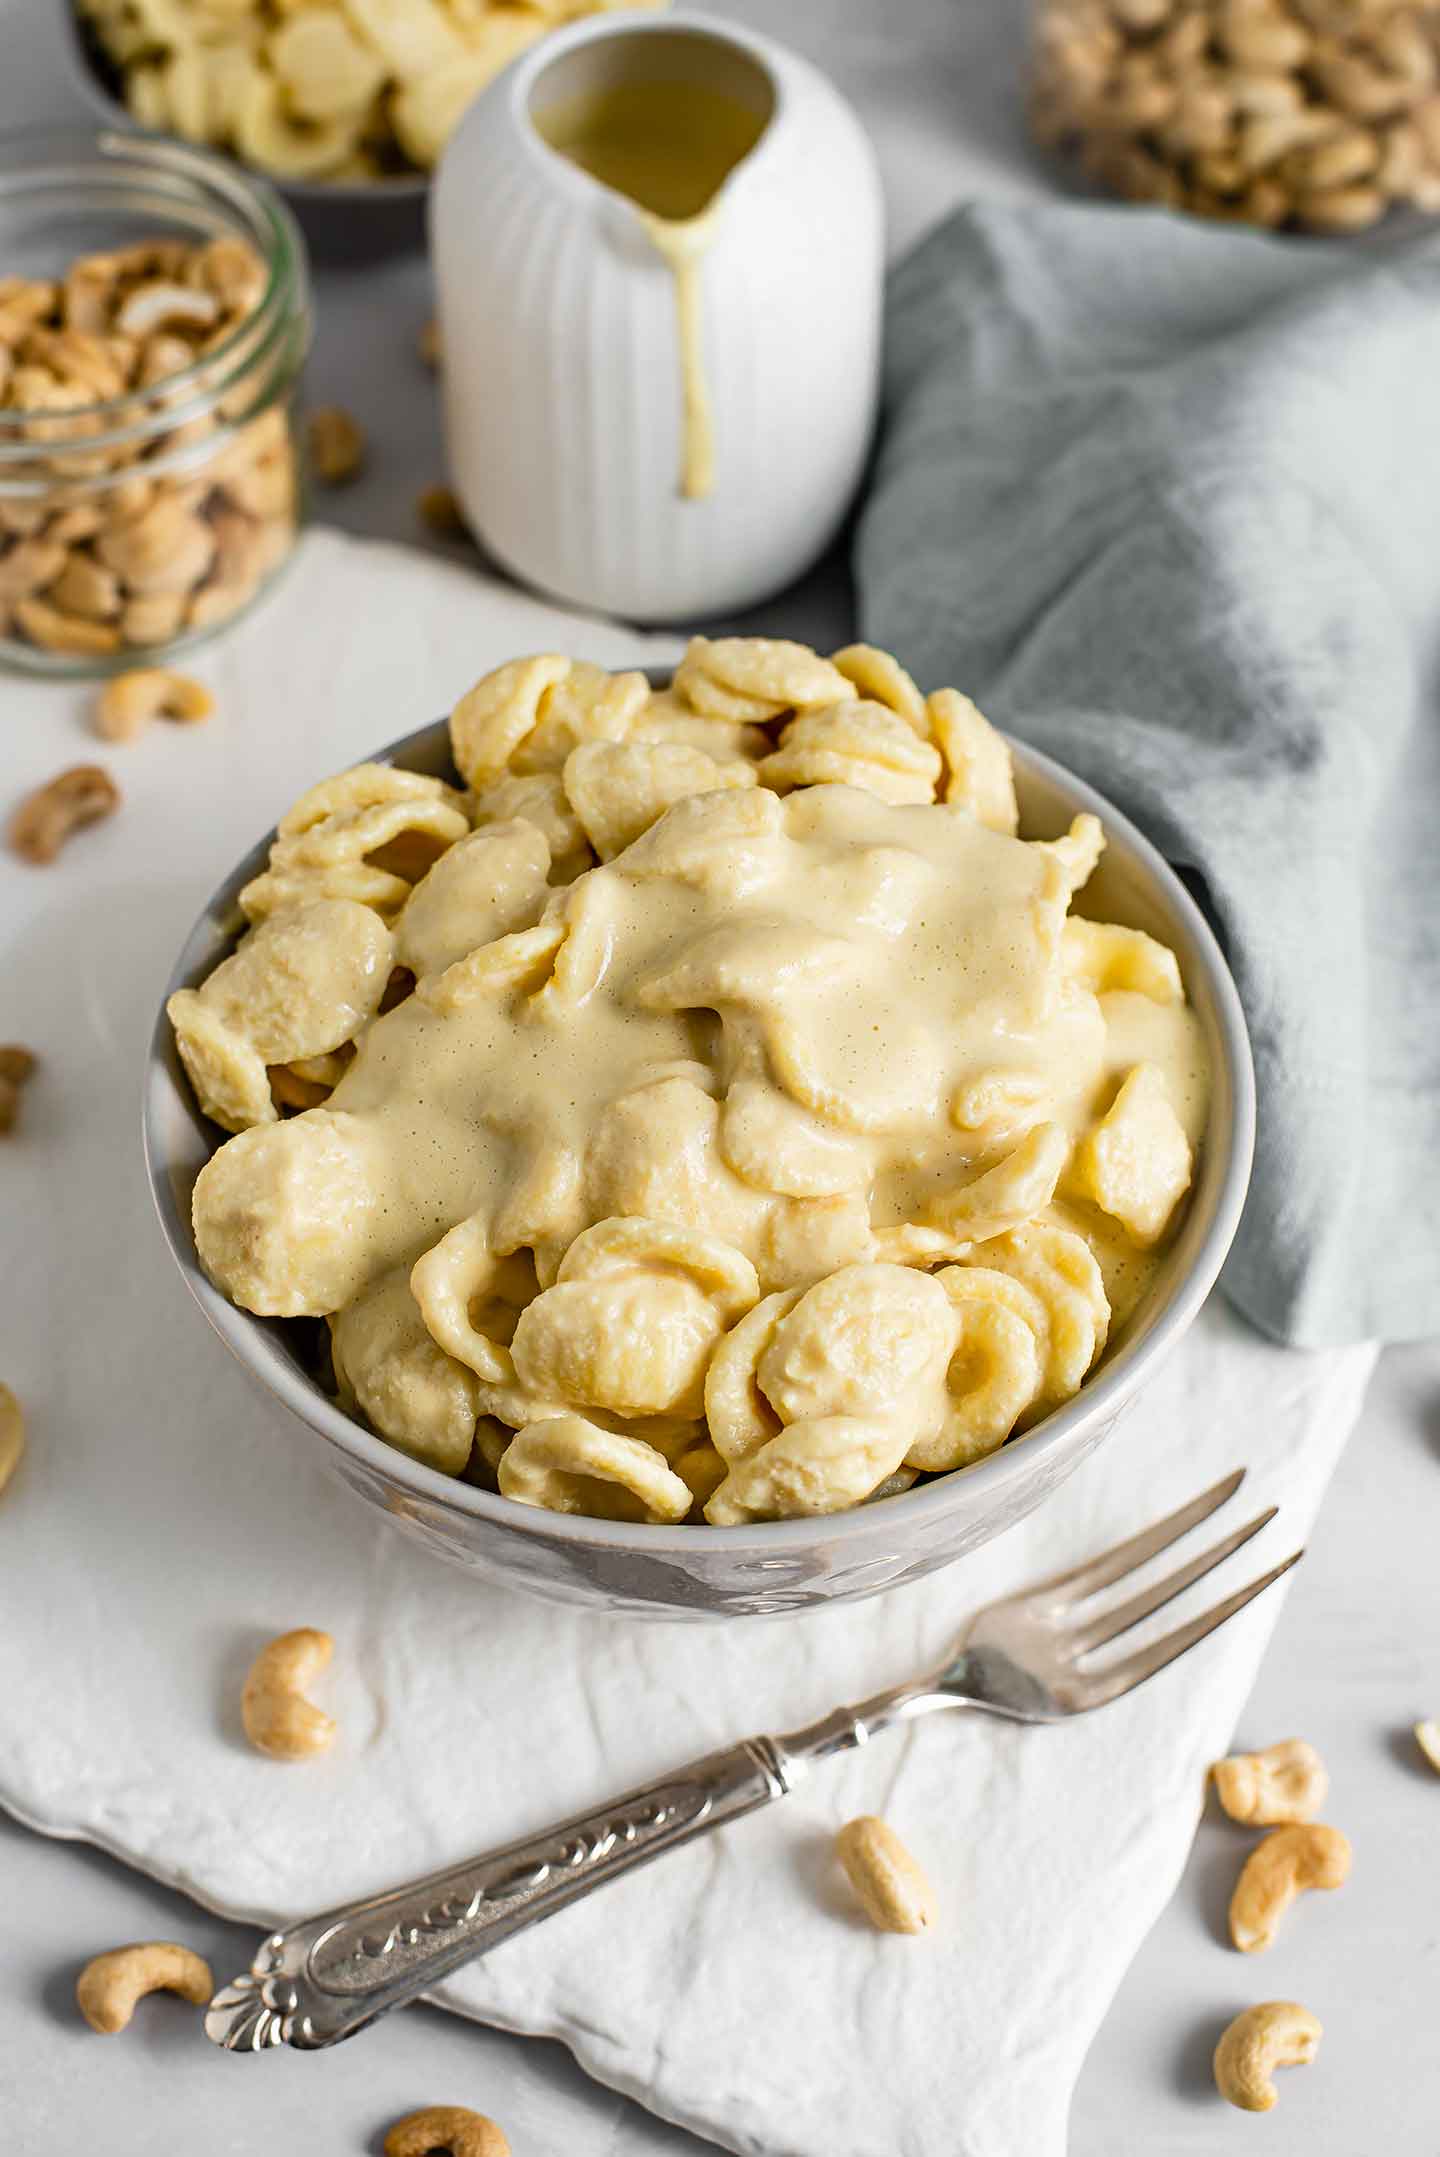 Top down side view of creamy vegan mac and cheese sauce on pasta shells. Extra sauce drips down a jar behind the bowl of pasta and raw cashews are scattered around the bowl.